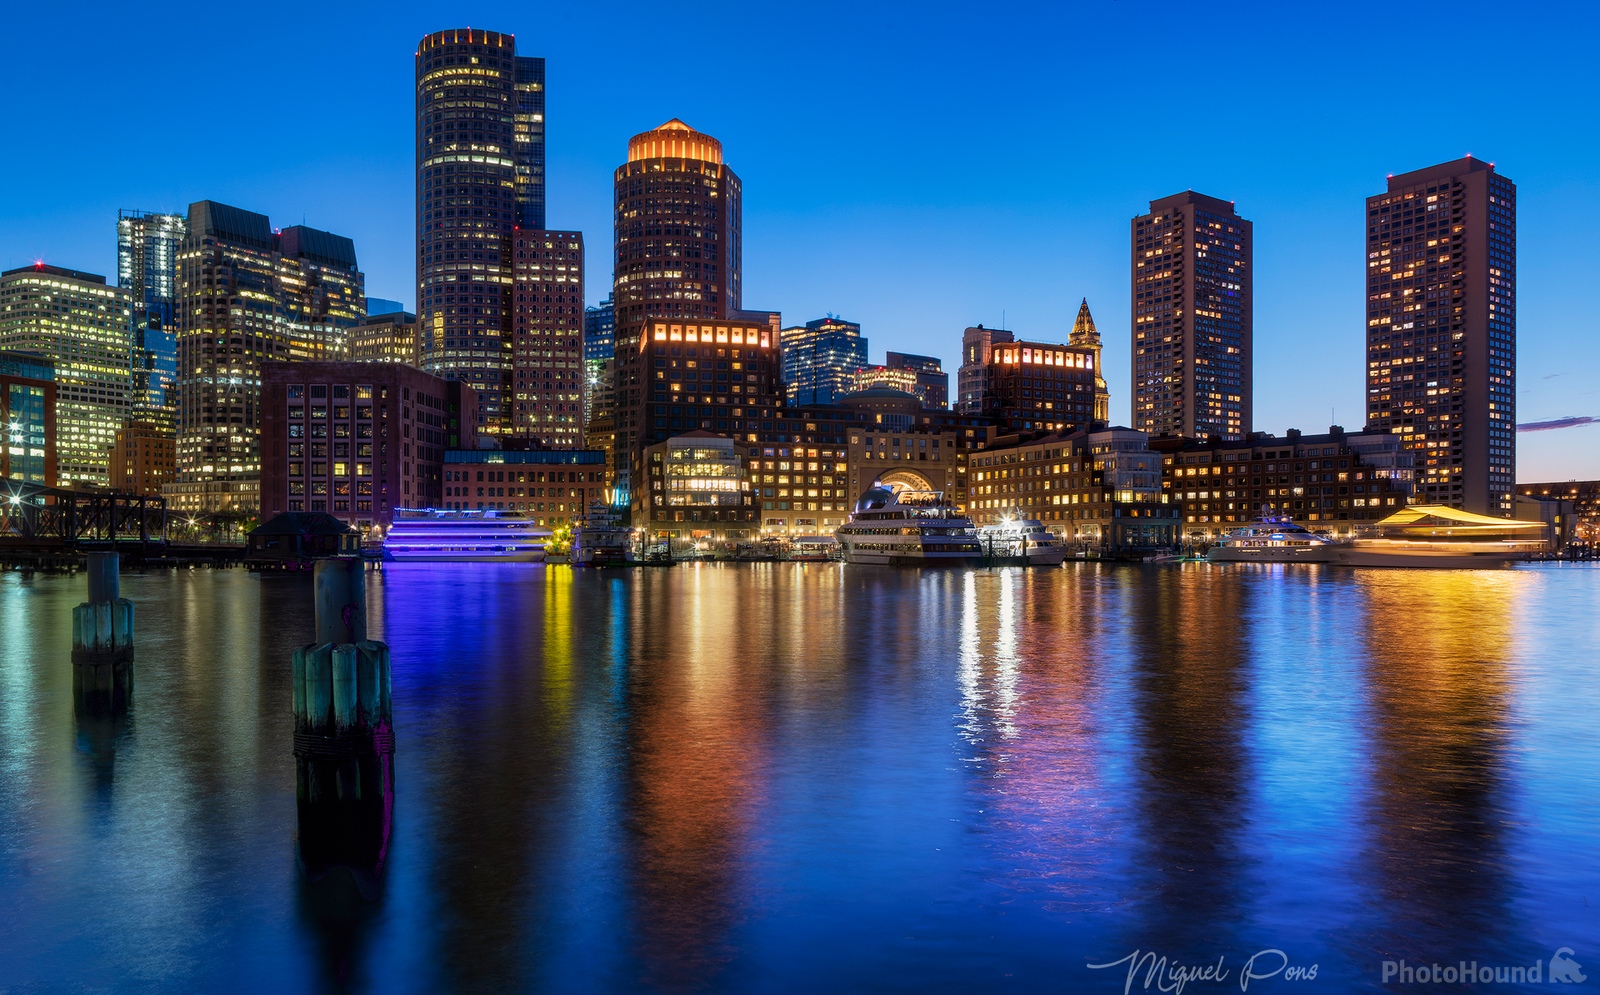 Image of Boston Skyline from Fan Pier Park by Miquel Pons Bassas